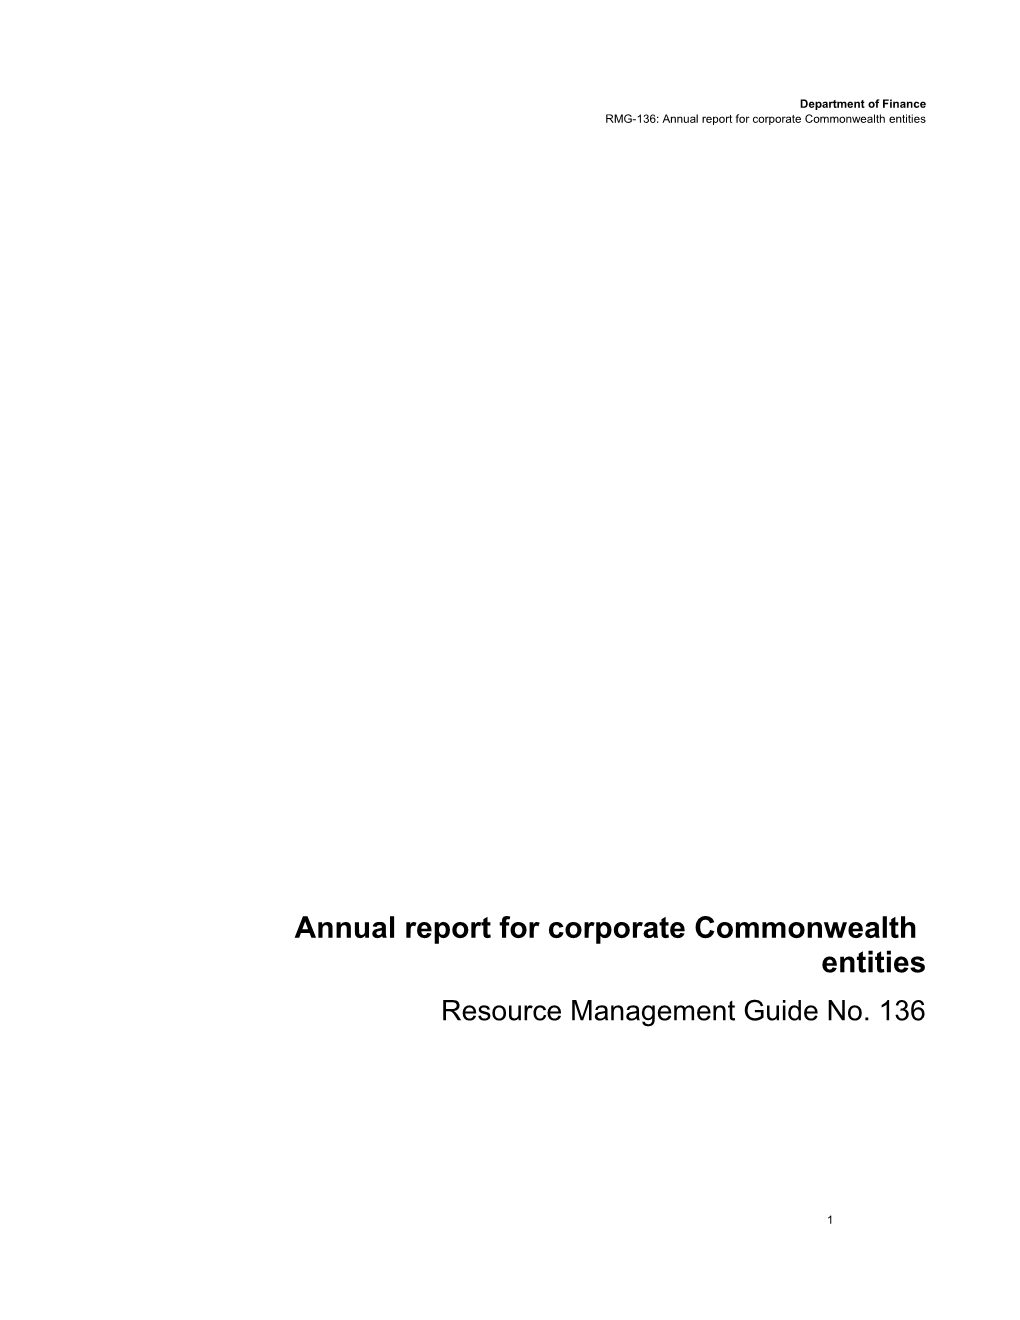 RMG-136: Annual Report for Corporate Commonwealth Entities